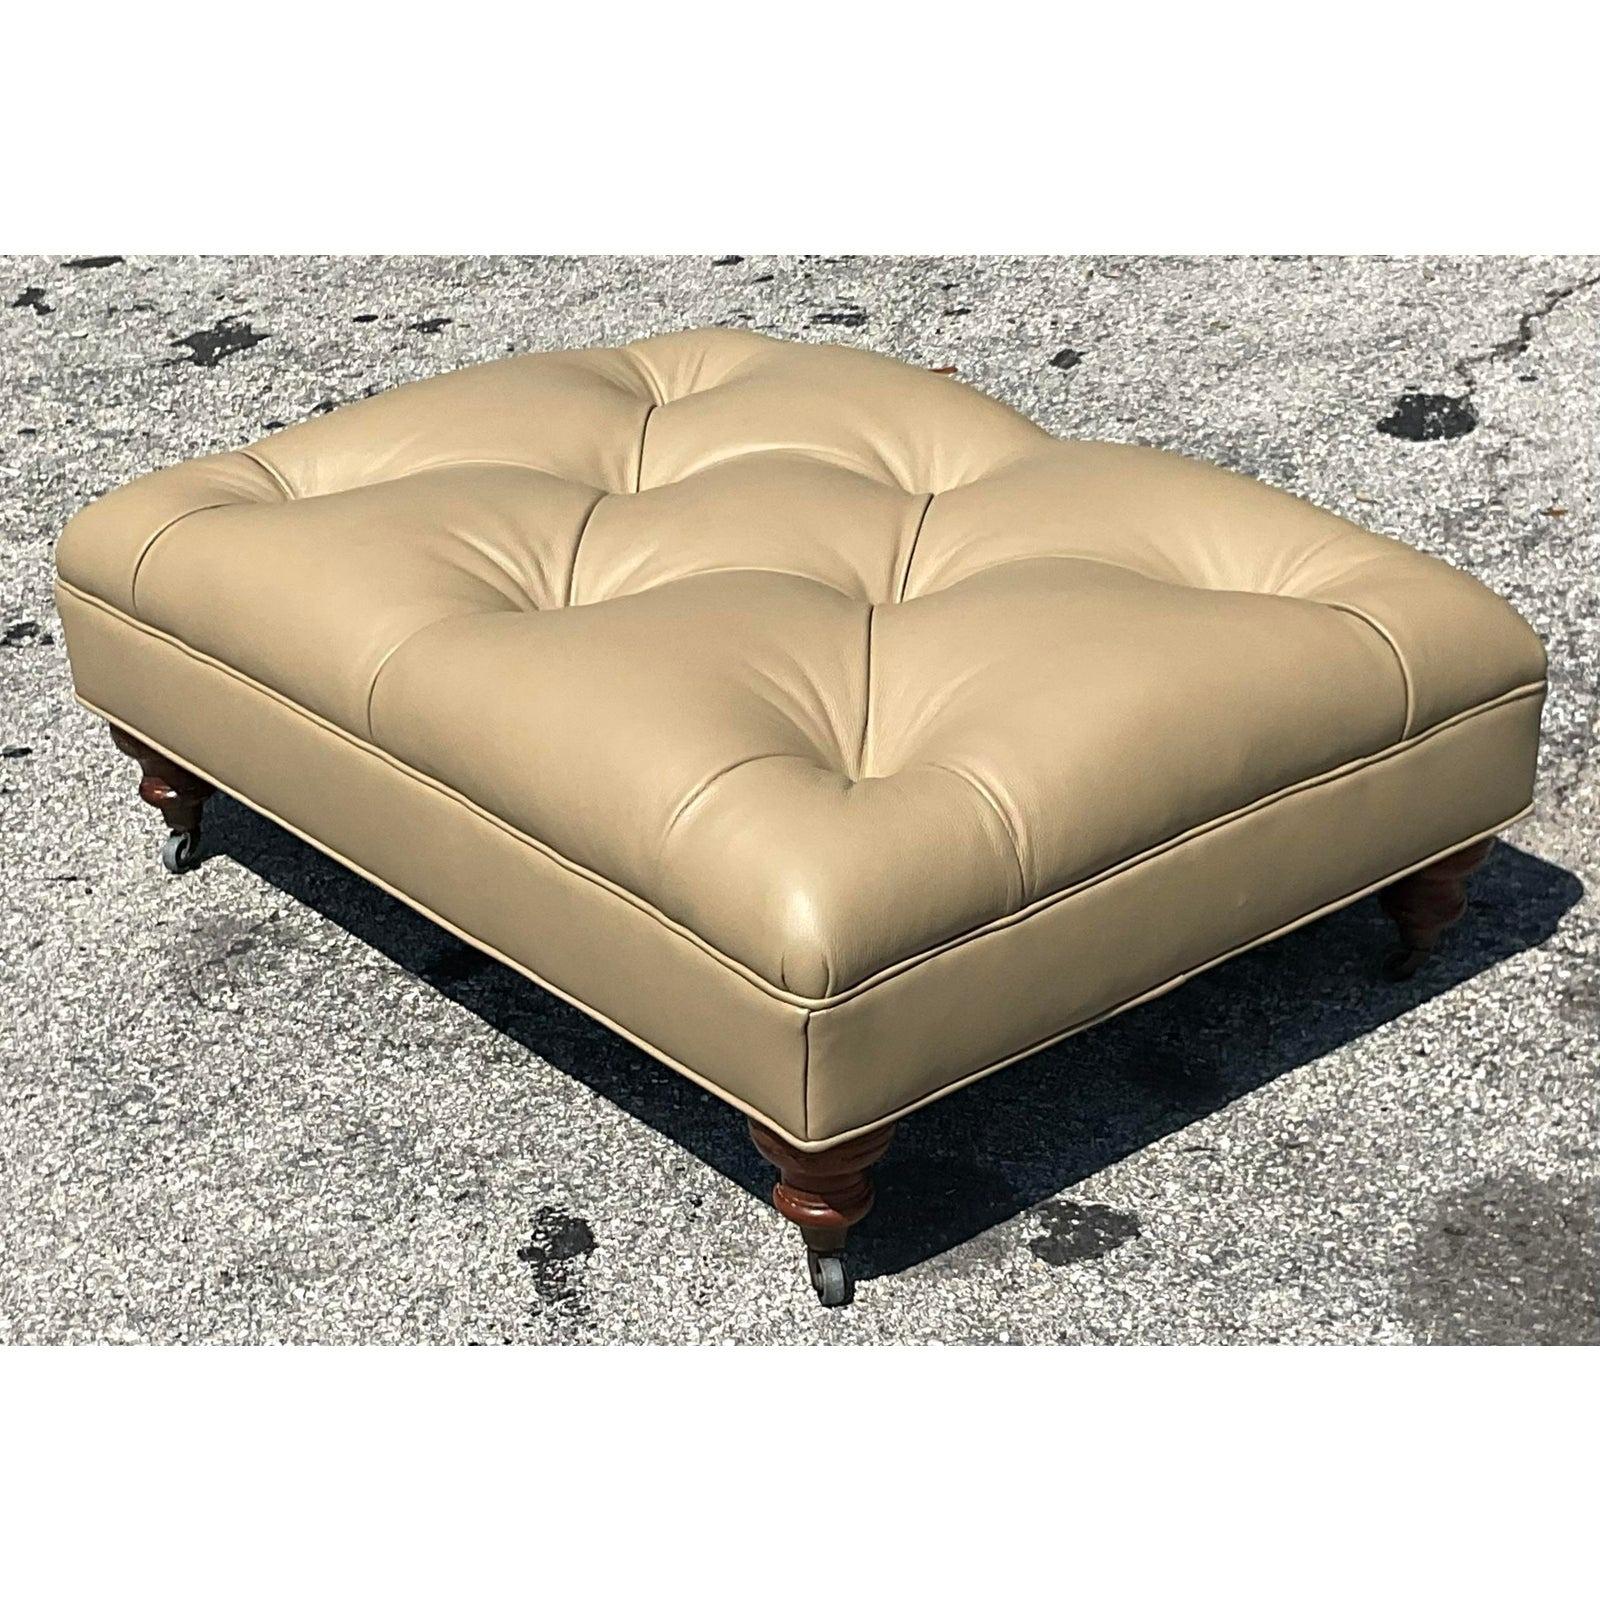 Vintage Tufted Leather Ottoman In Good Condition For Sale In west palm beach, FL